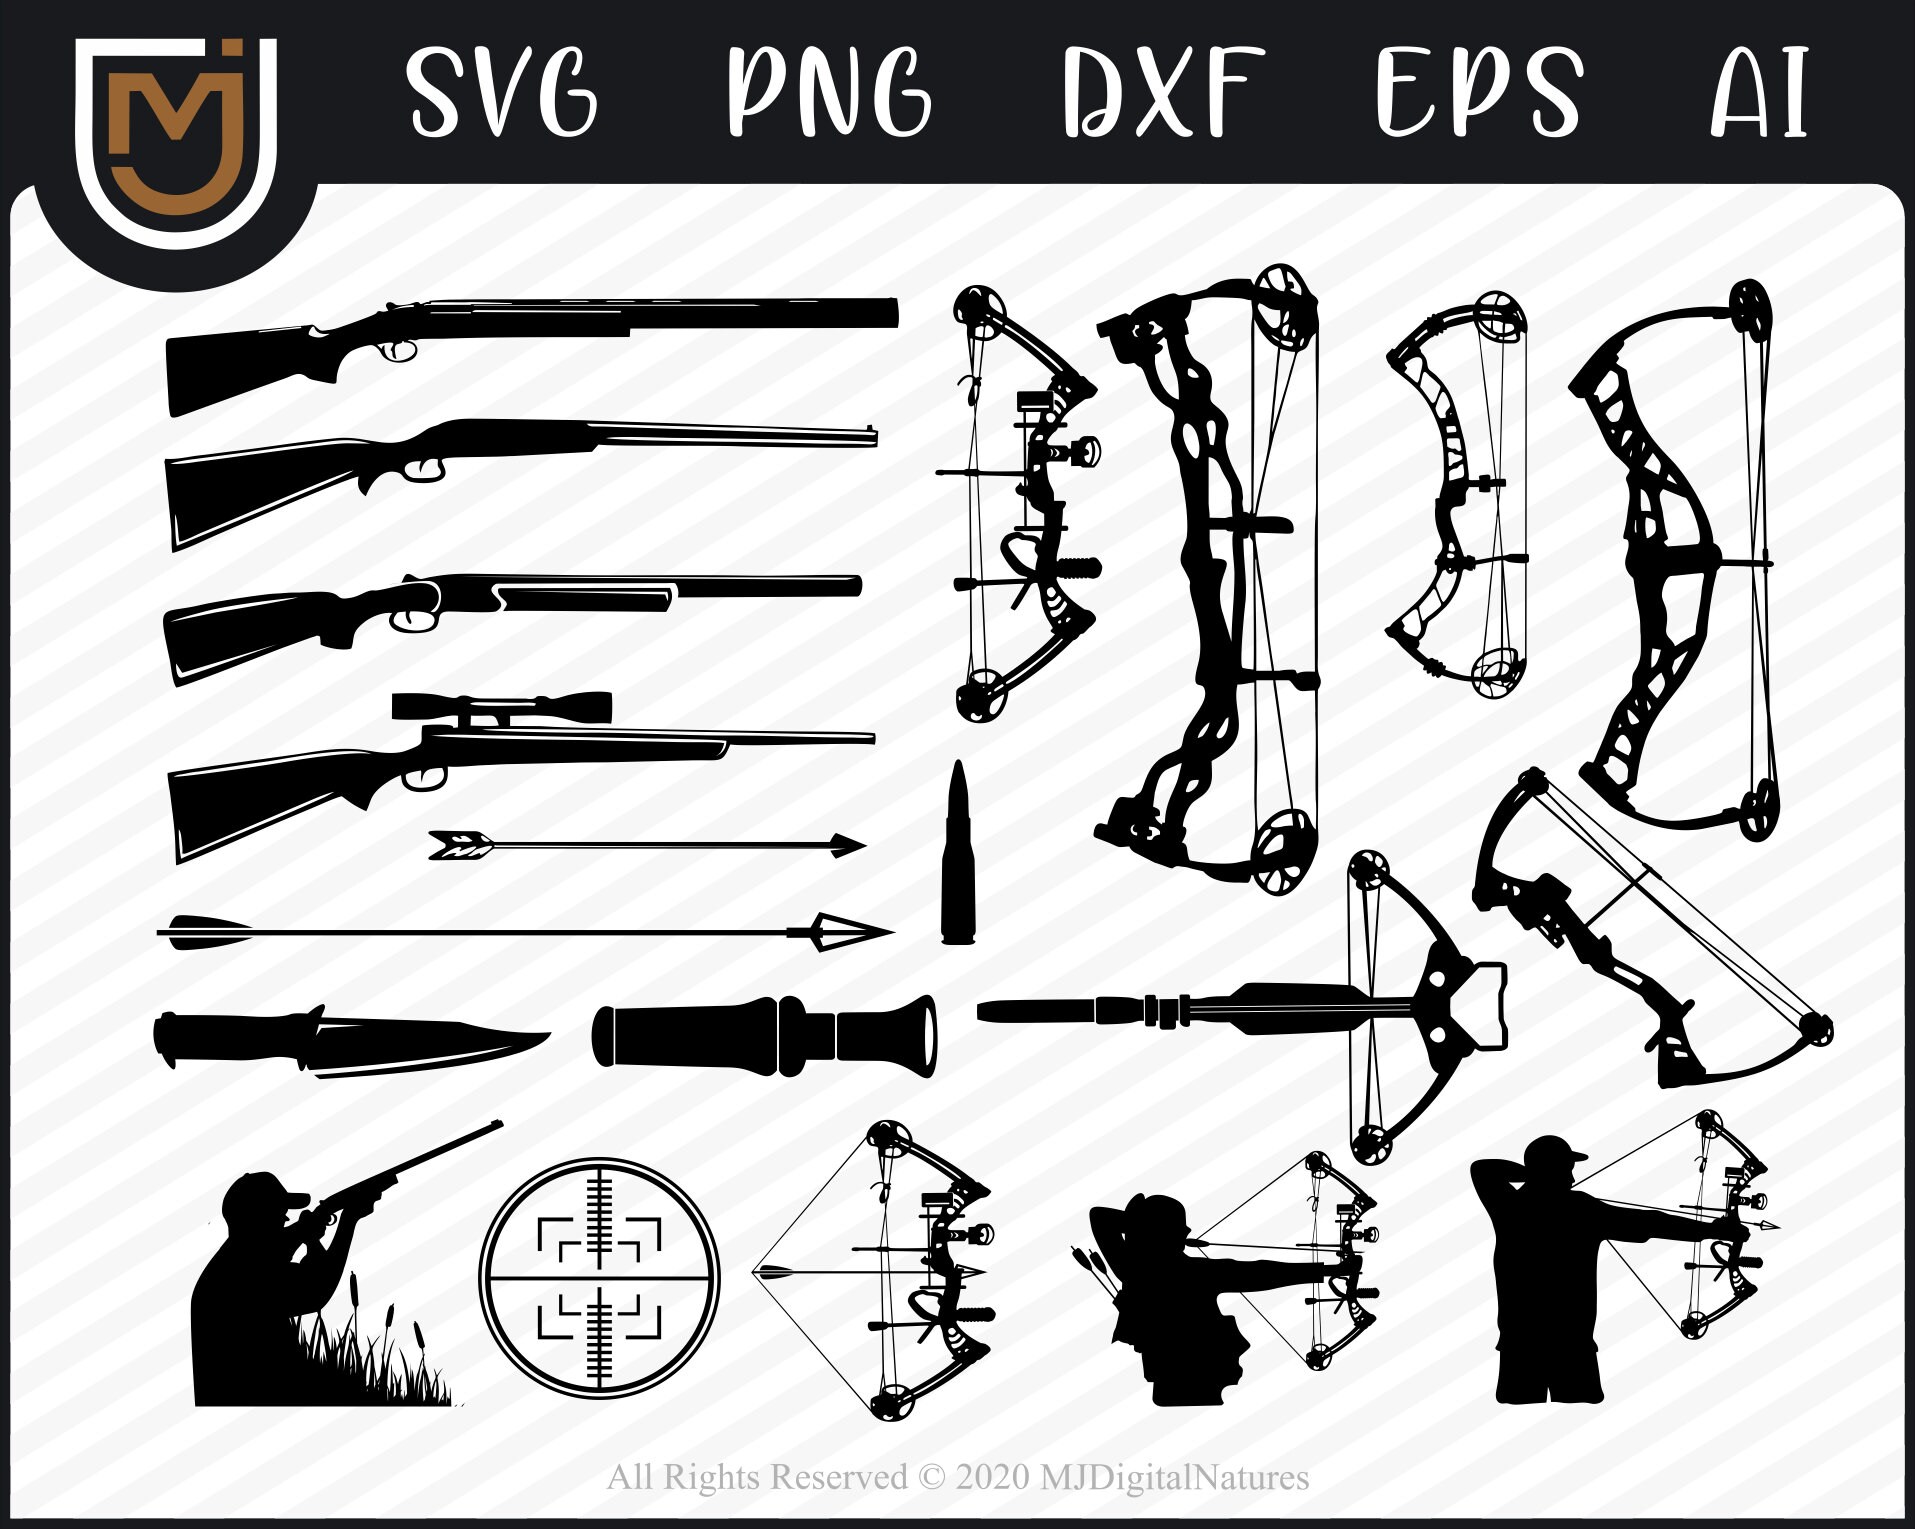 archery bow and arrow images clipart